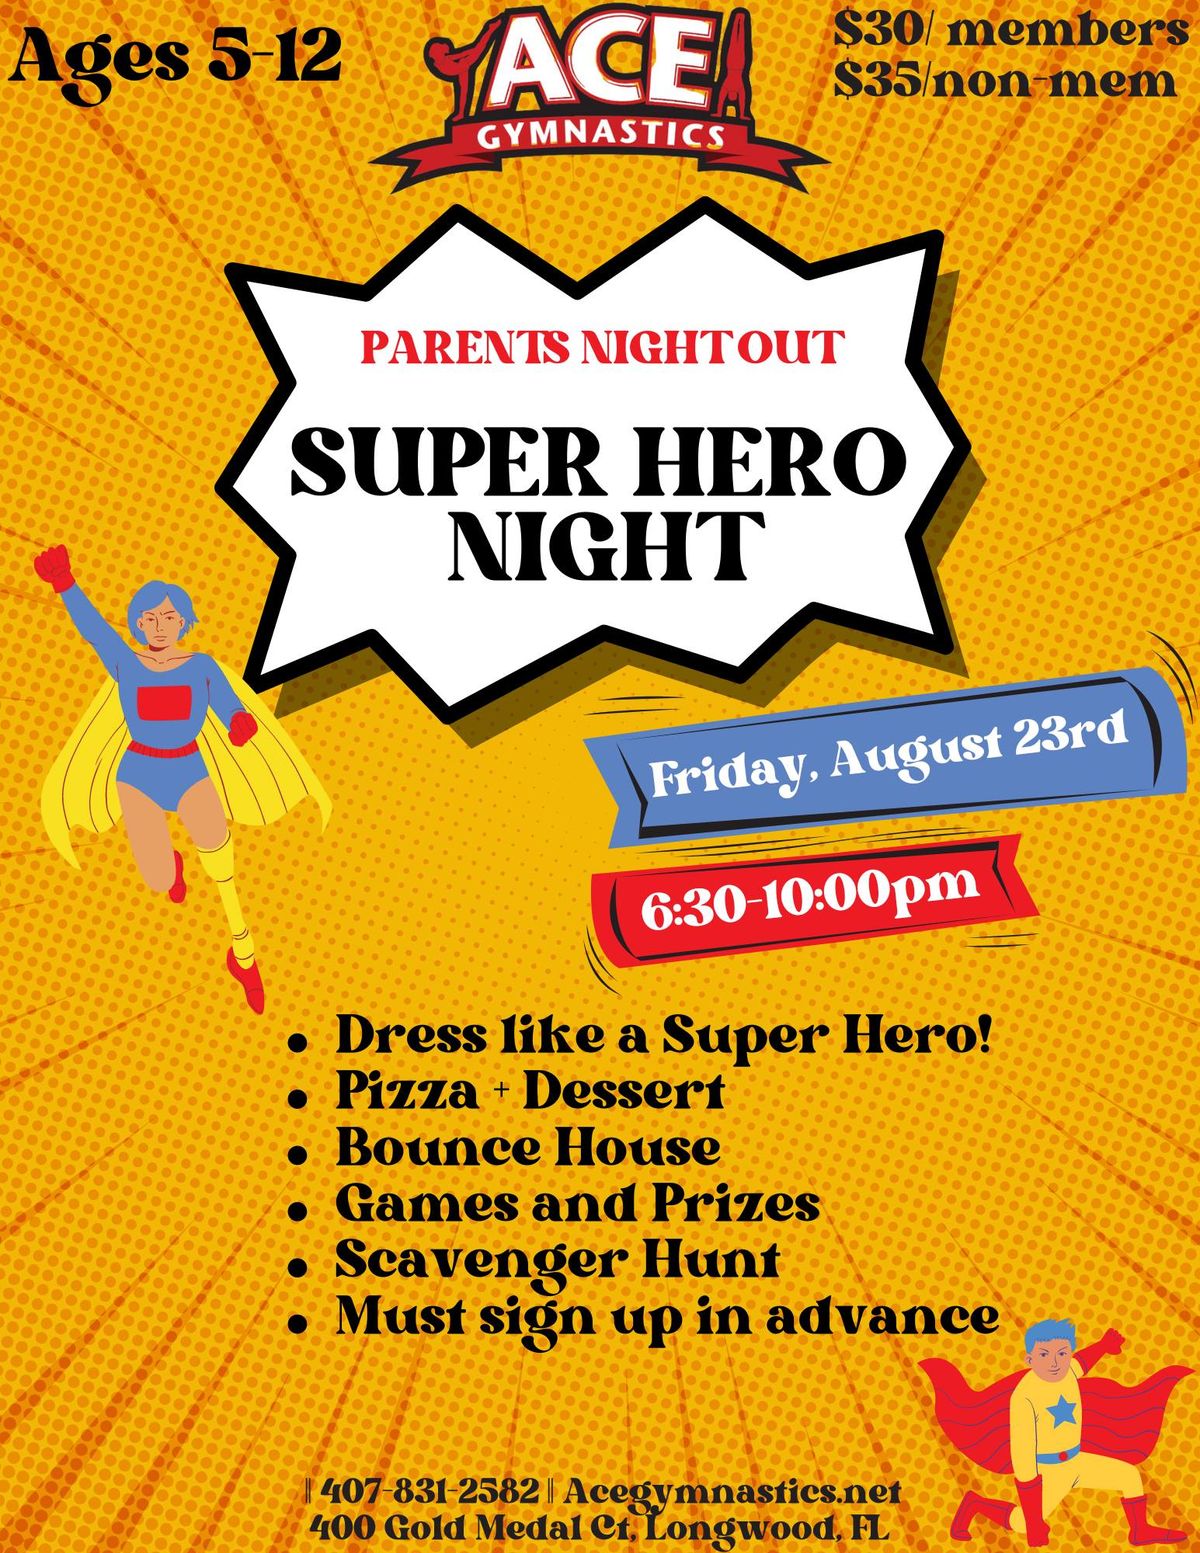 Super Hero Night: Parents Night Out